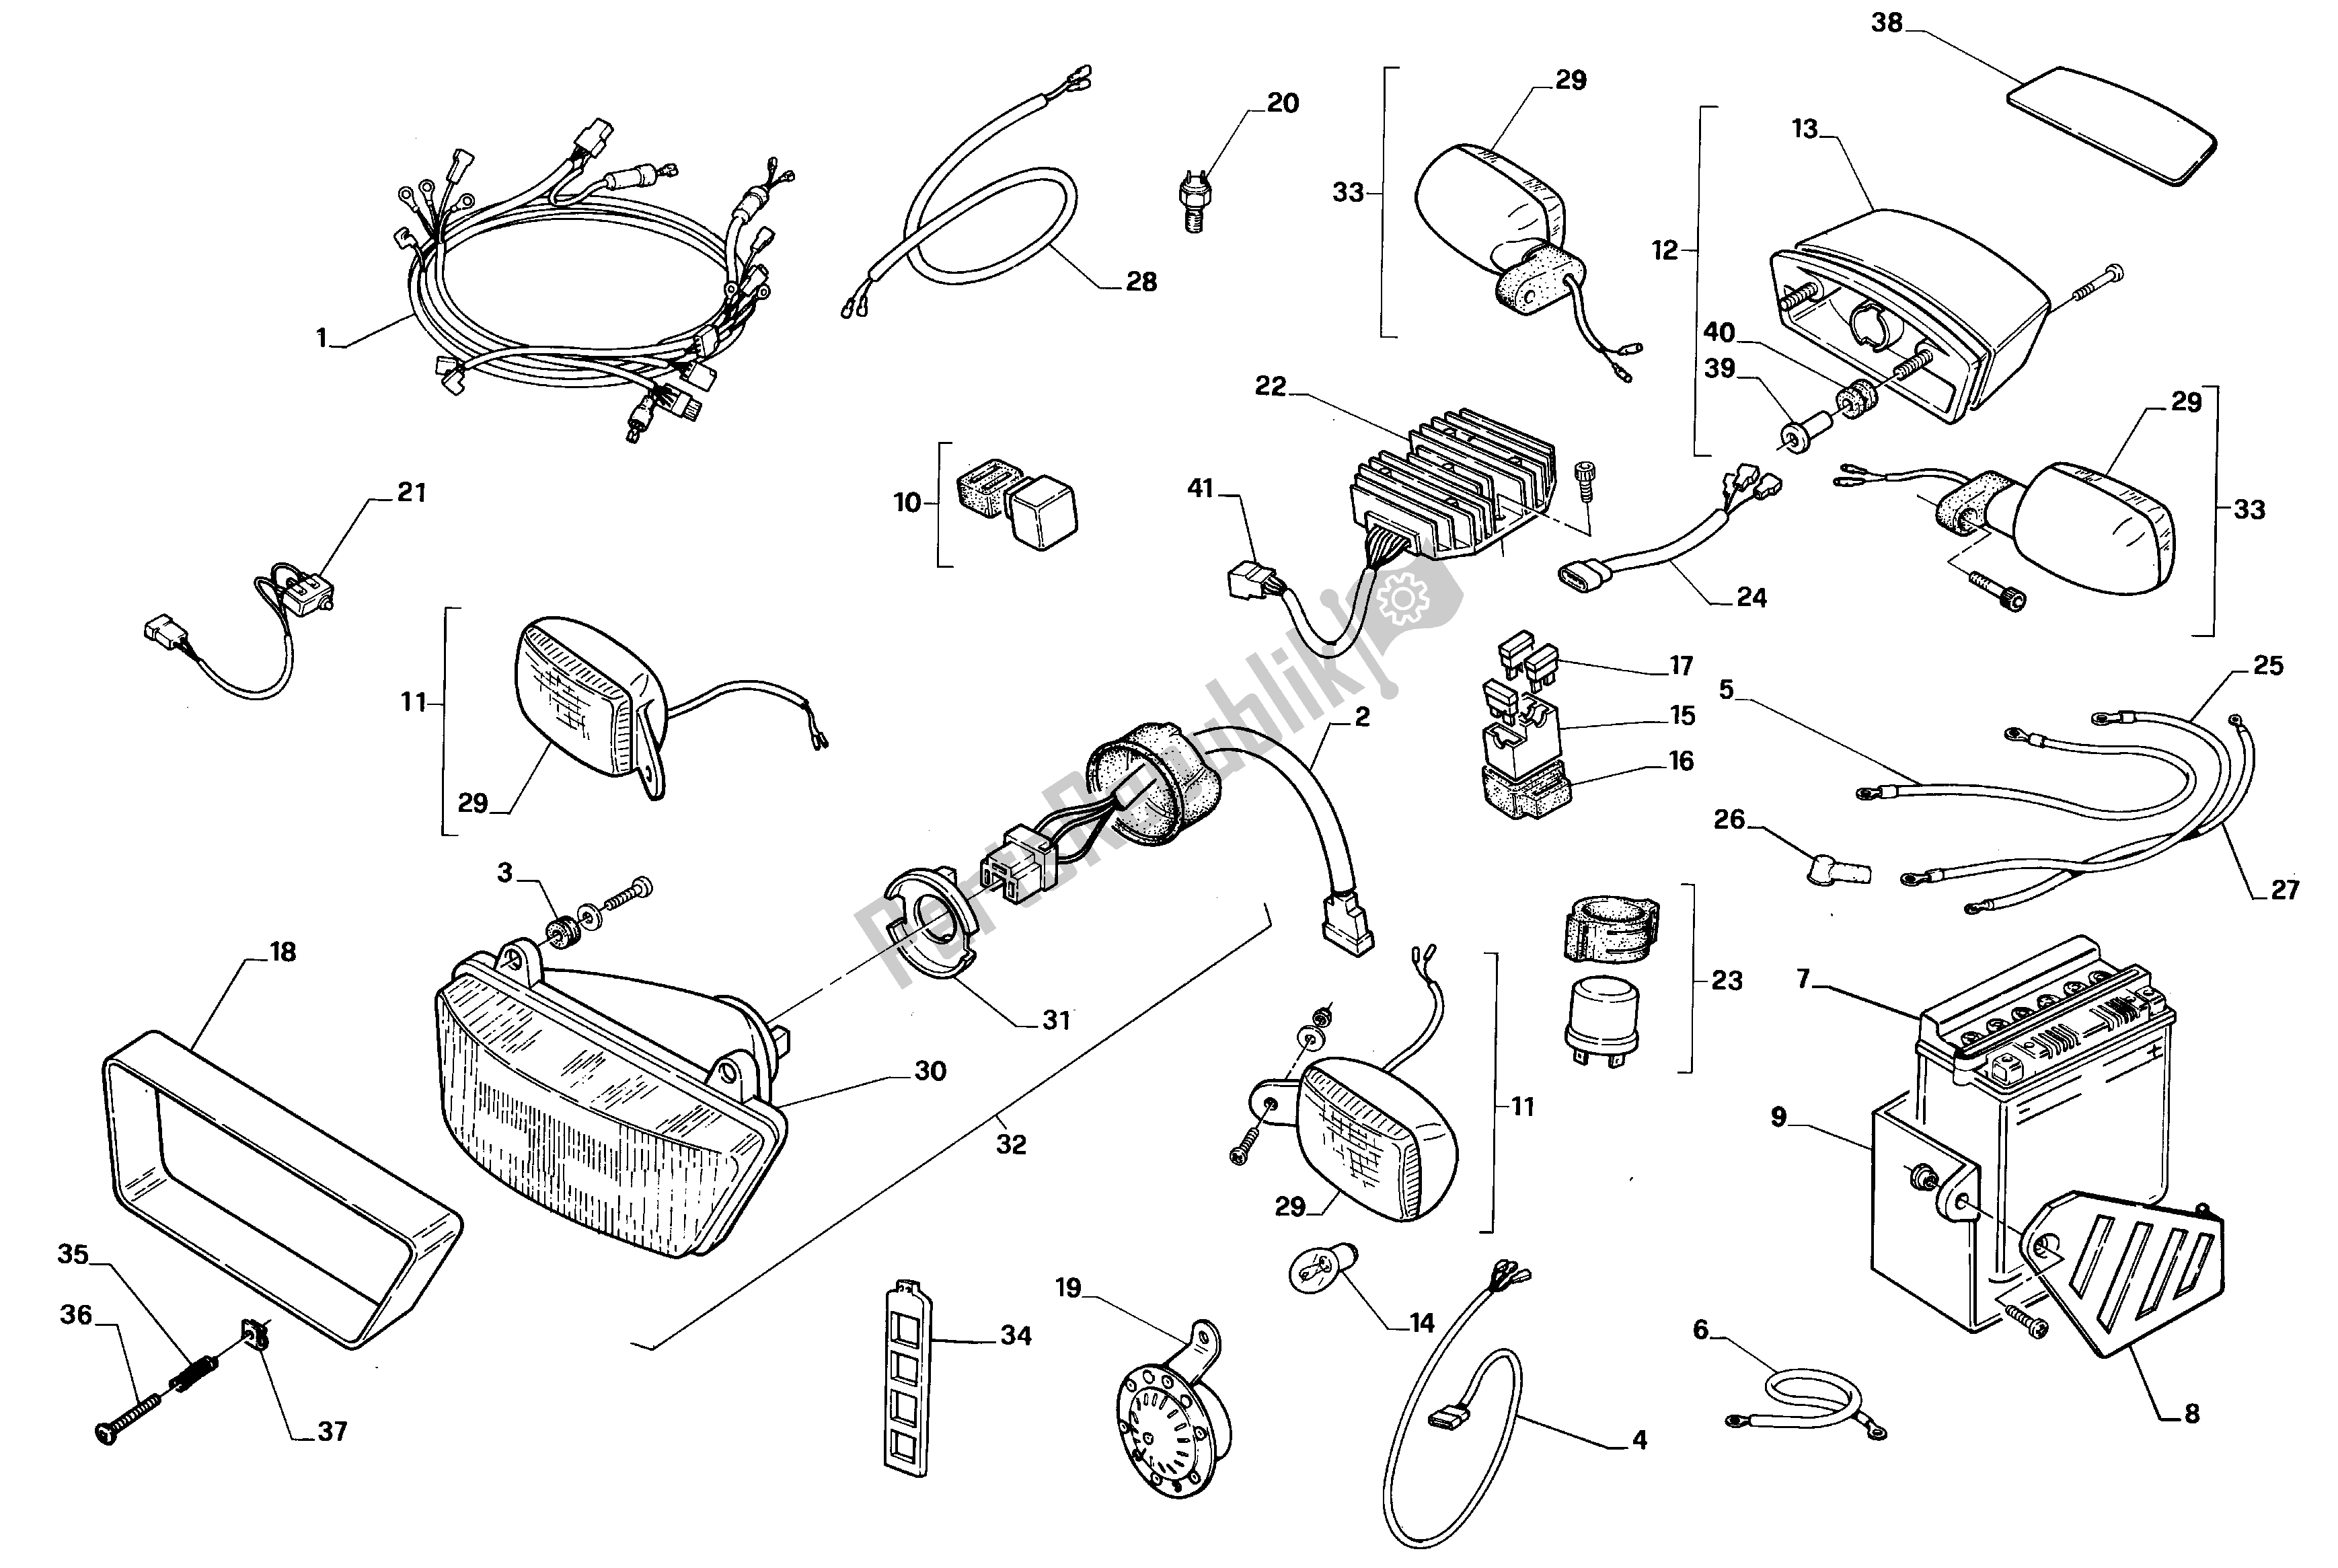 All parts for the Electrical System of the Aprilia Pegaso 650 1992 - 1996